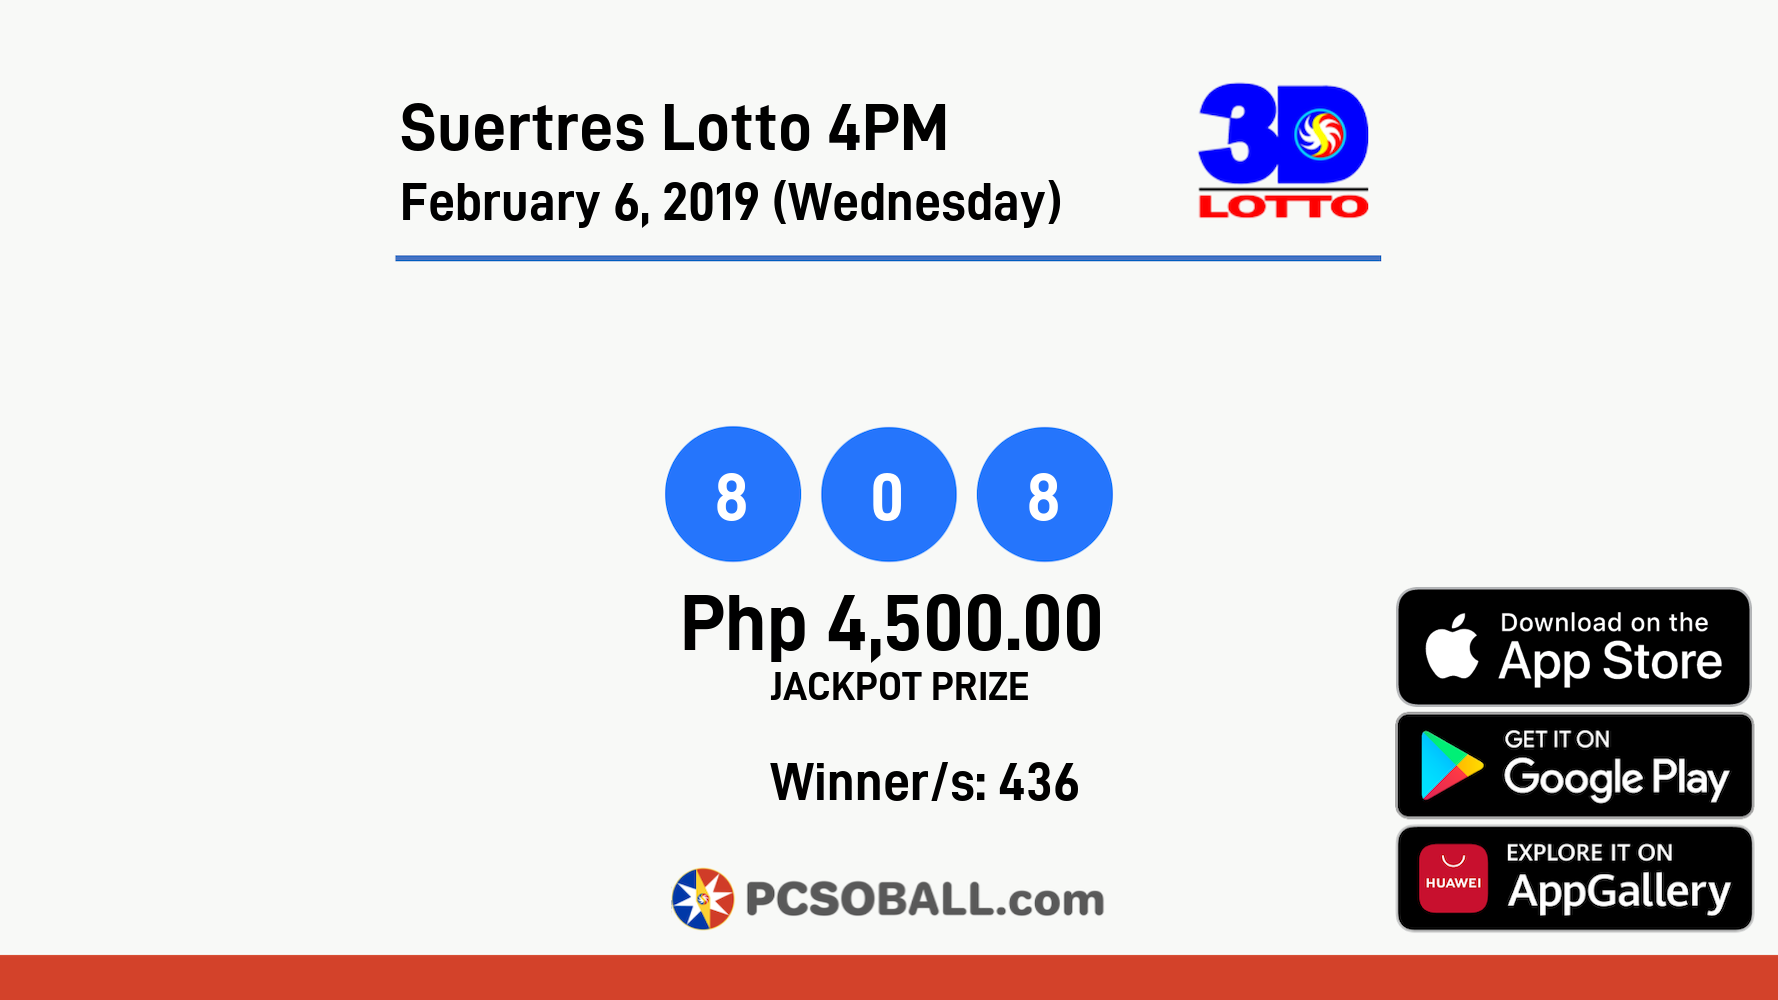 Suertres Lotto 4PM February 6, 2019 (Wednesday) Result